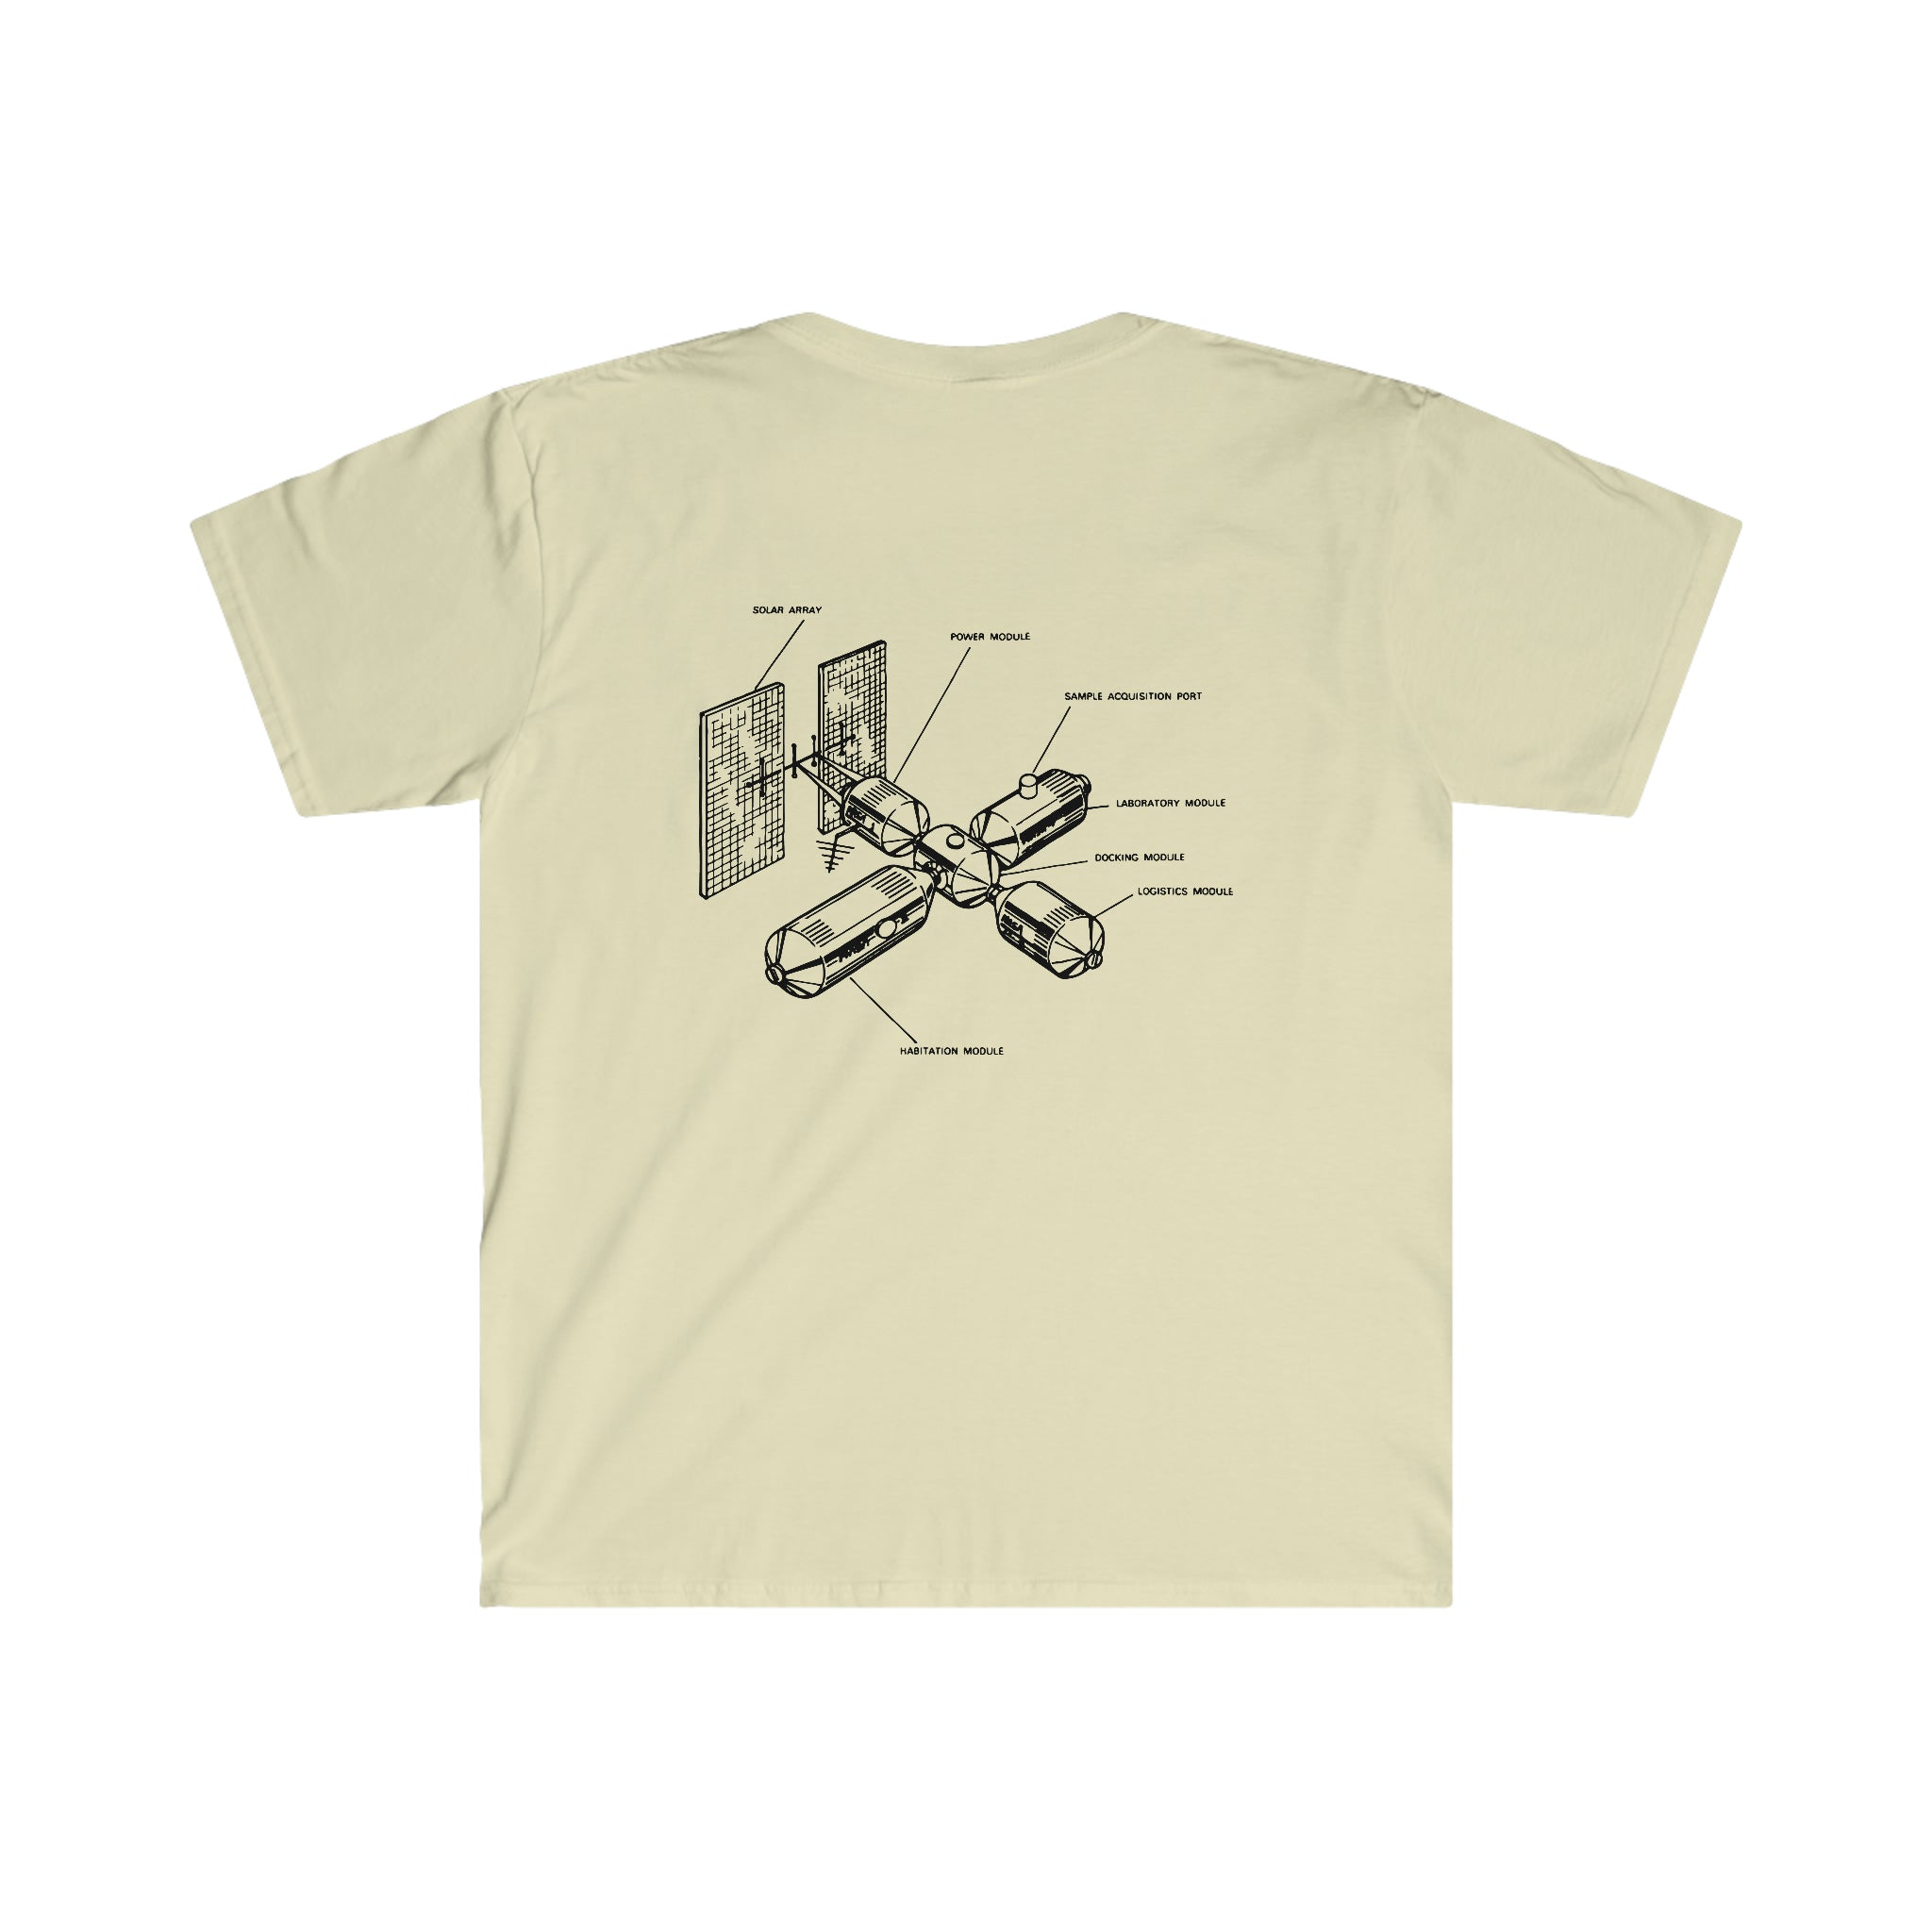 A beige Space Station T-Shirt with a diagram of a space station on it.